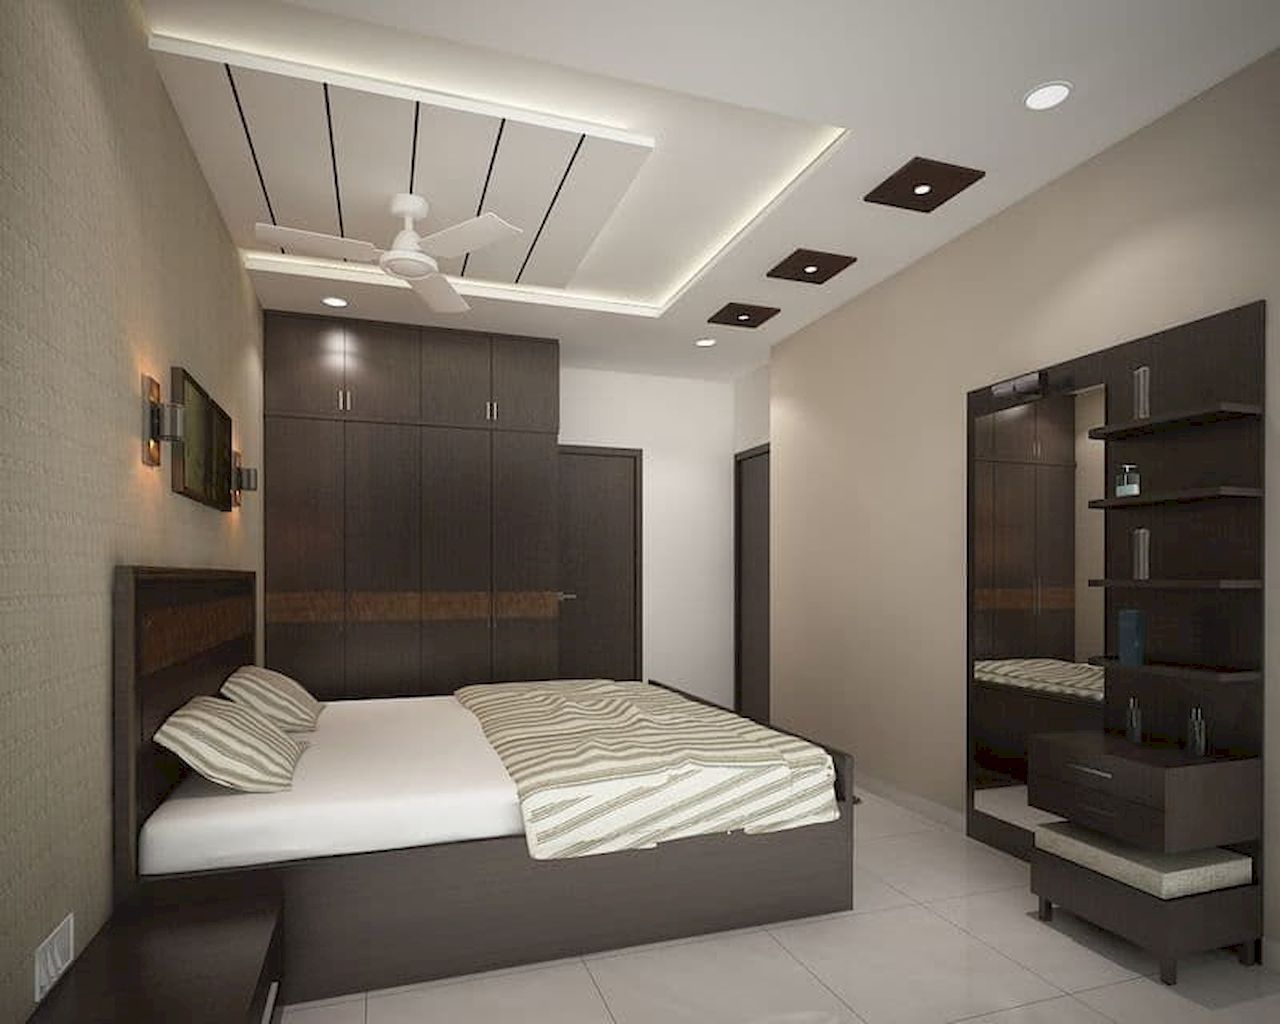 Ceiling Harmony: Blending Your Bedroom Ceiling With Overall Decor